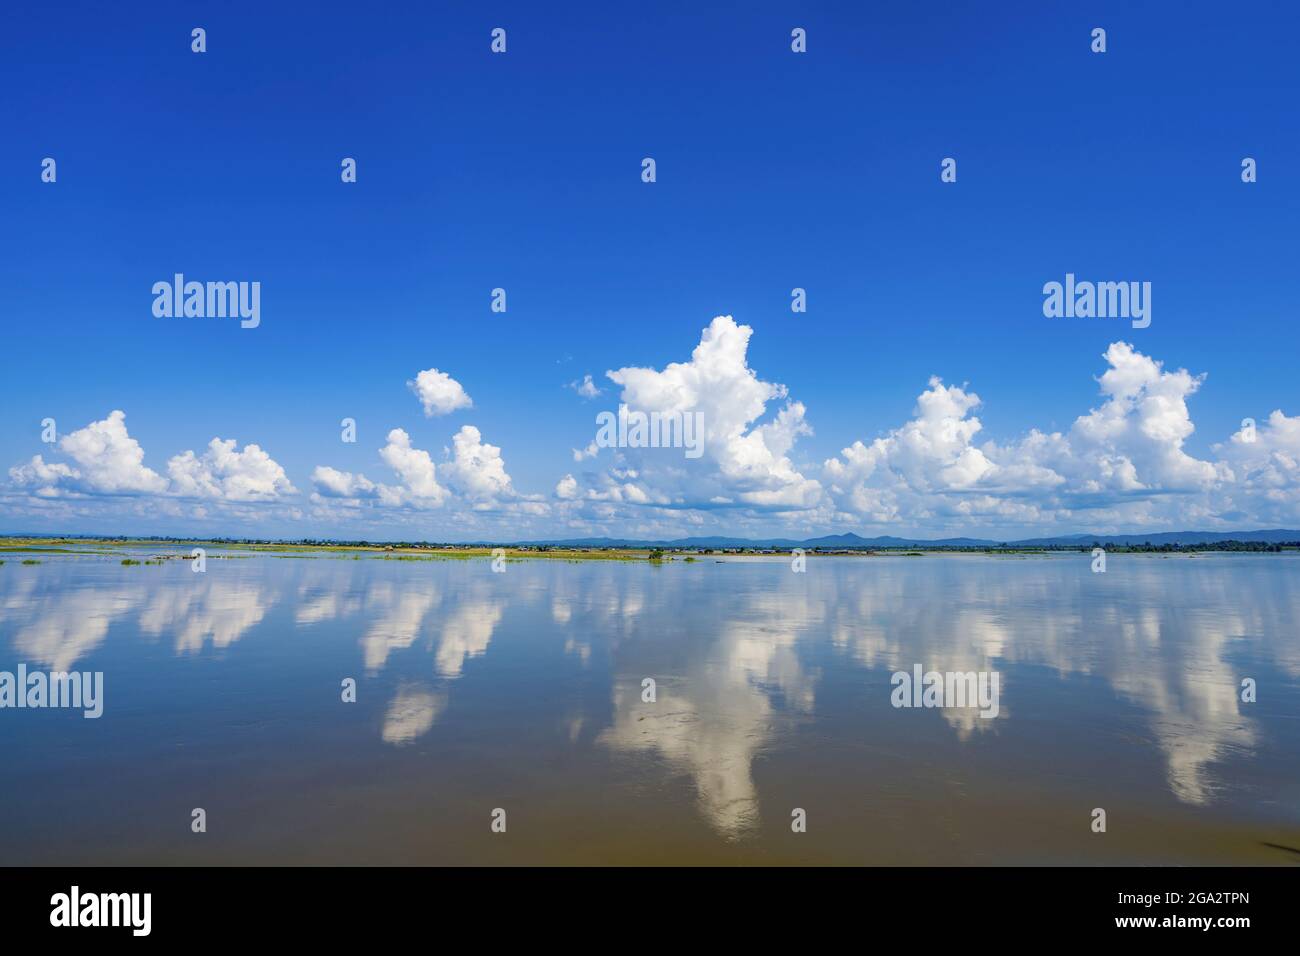 Clouds over the banks of the Ayeyarwady (Irrawaddy) river with the mirror image of clouds in the water in Kachin State, Myanmar/Burma; Kachin, Myanmar Stock Photo